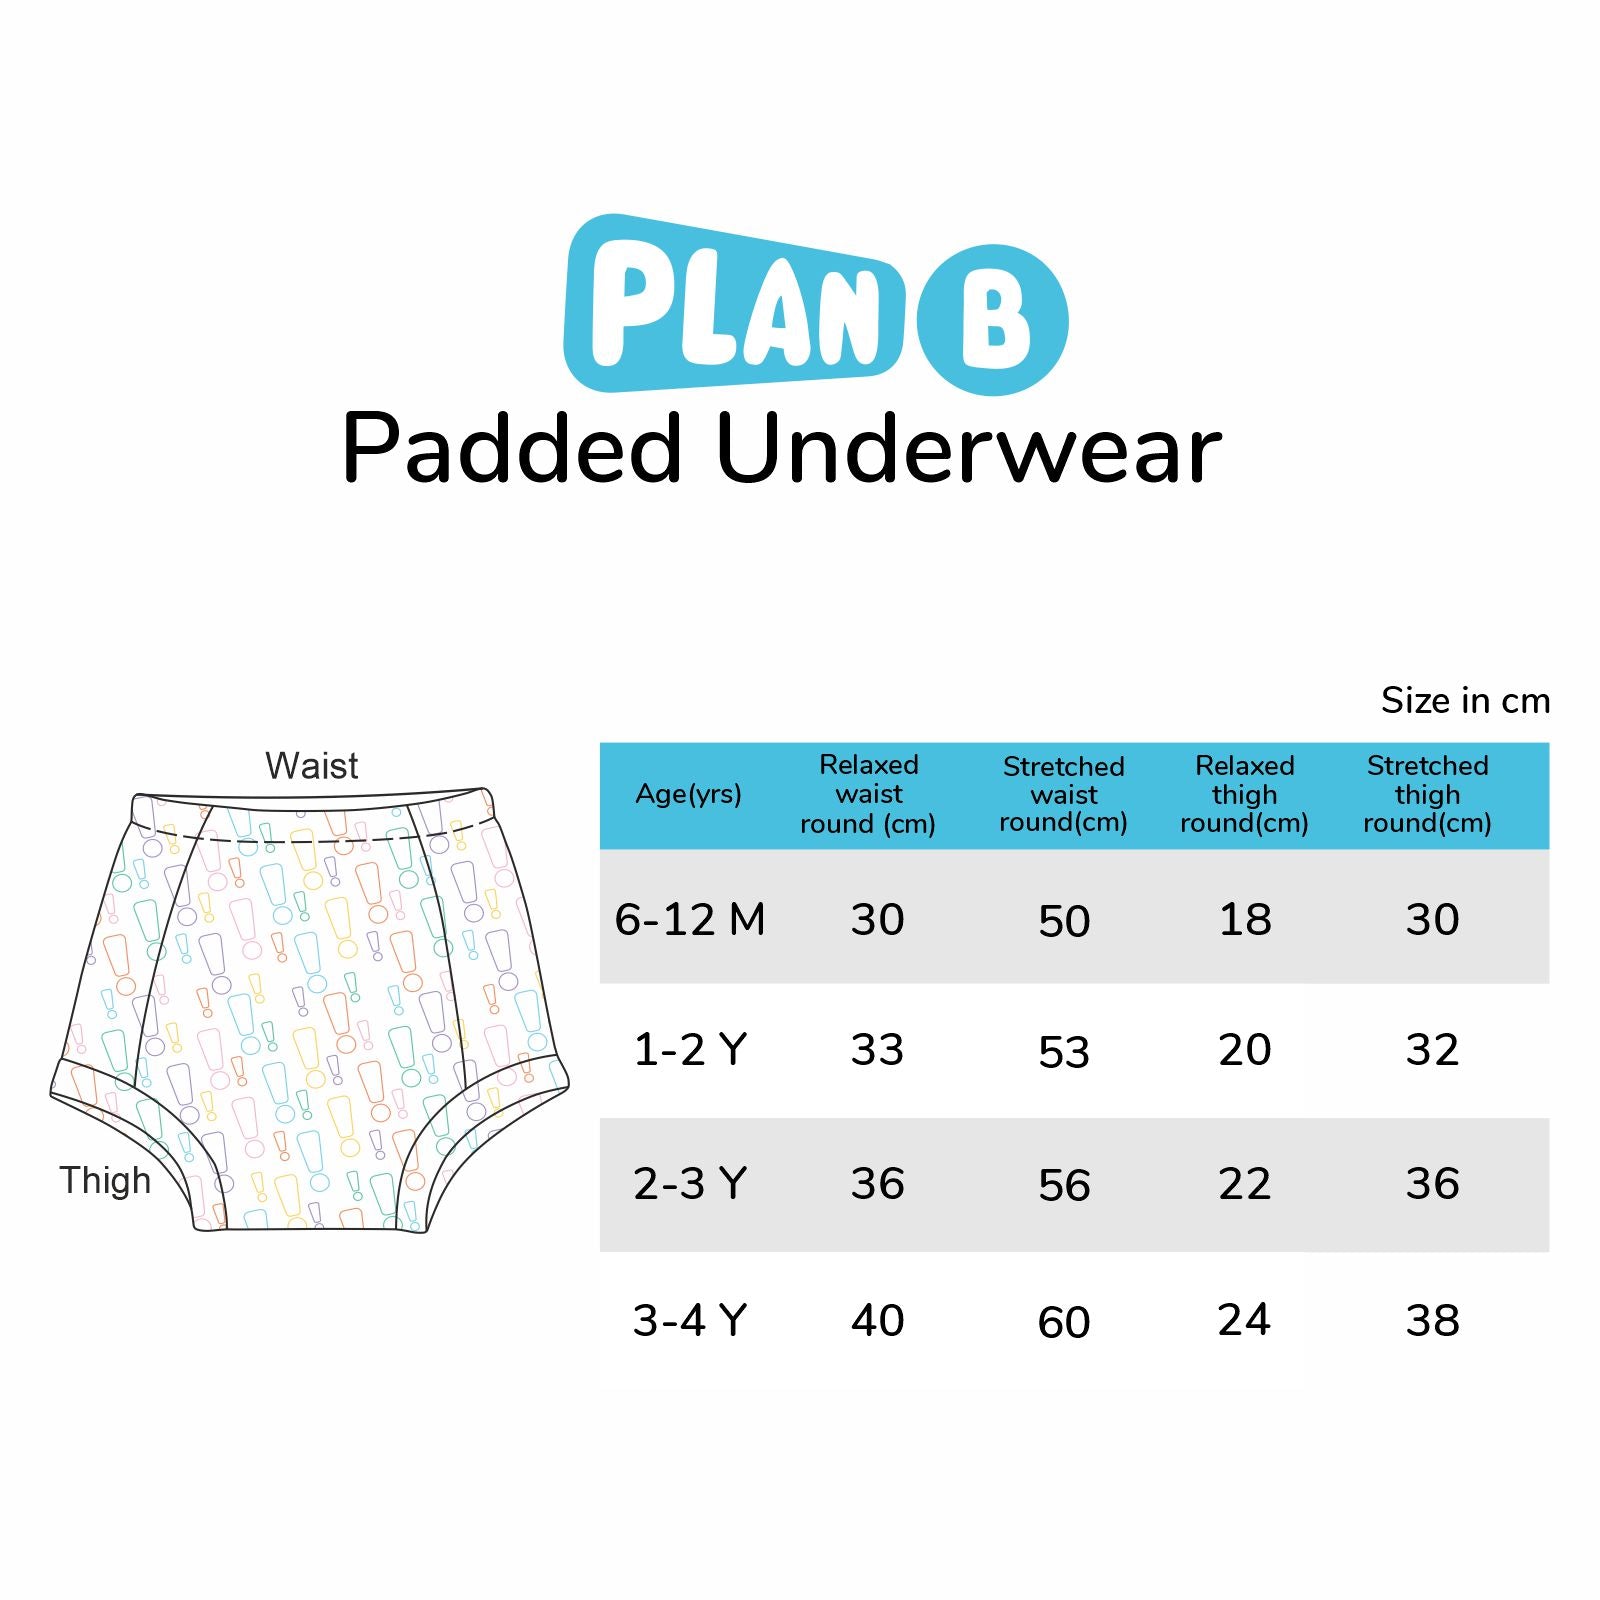 Padded Underwear for Potty Training - 4pack - Critters – Plan B